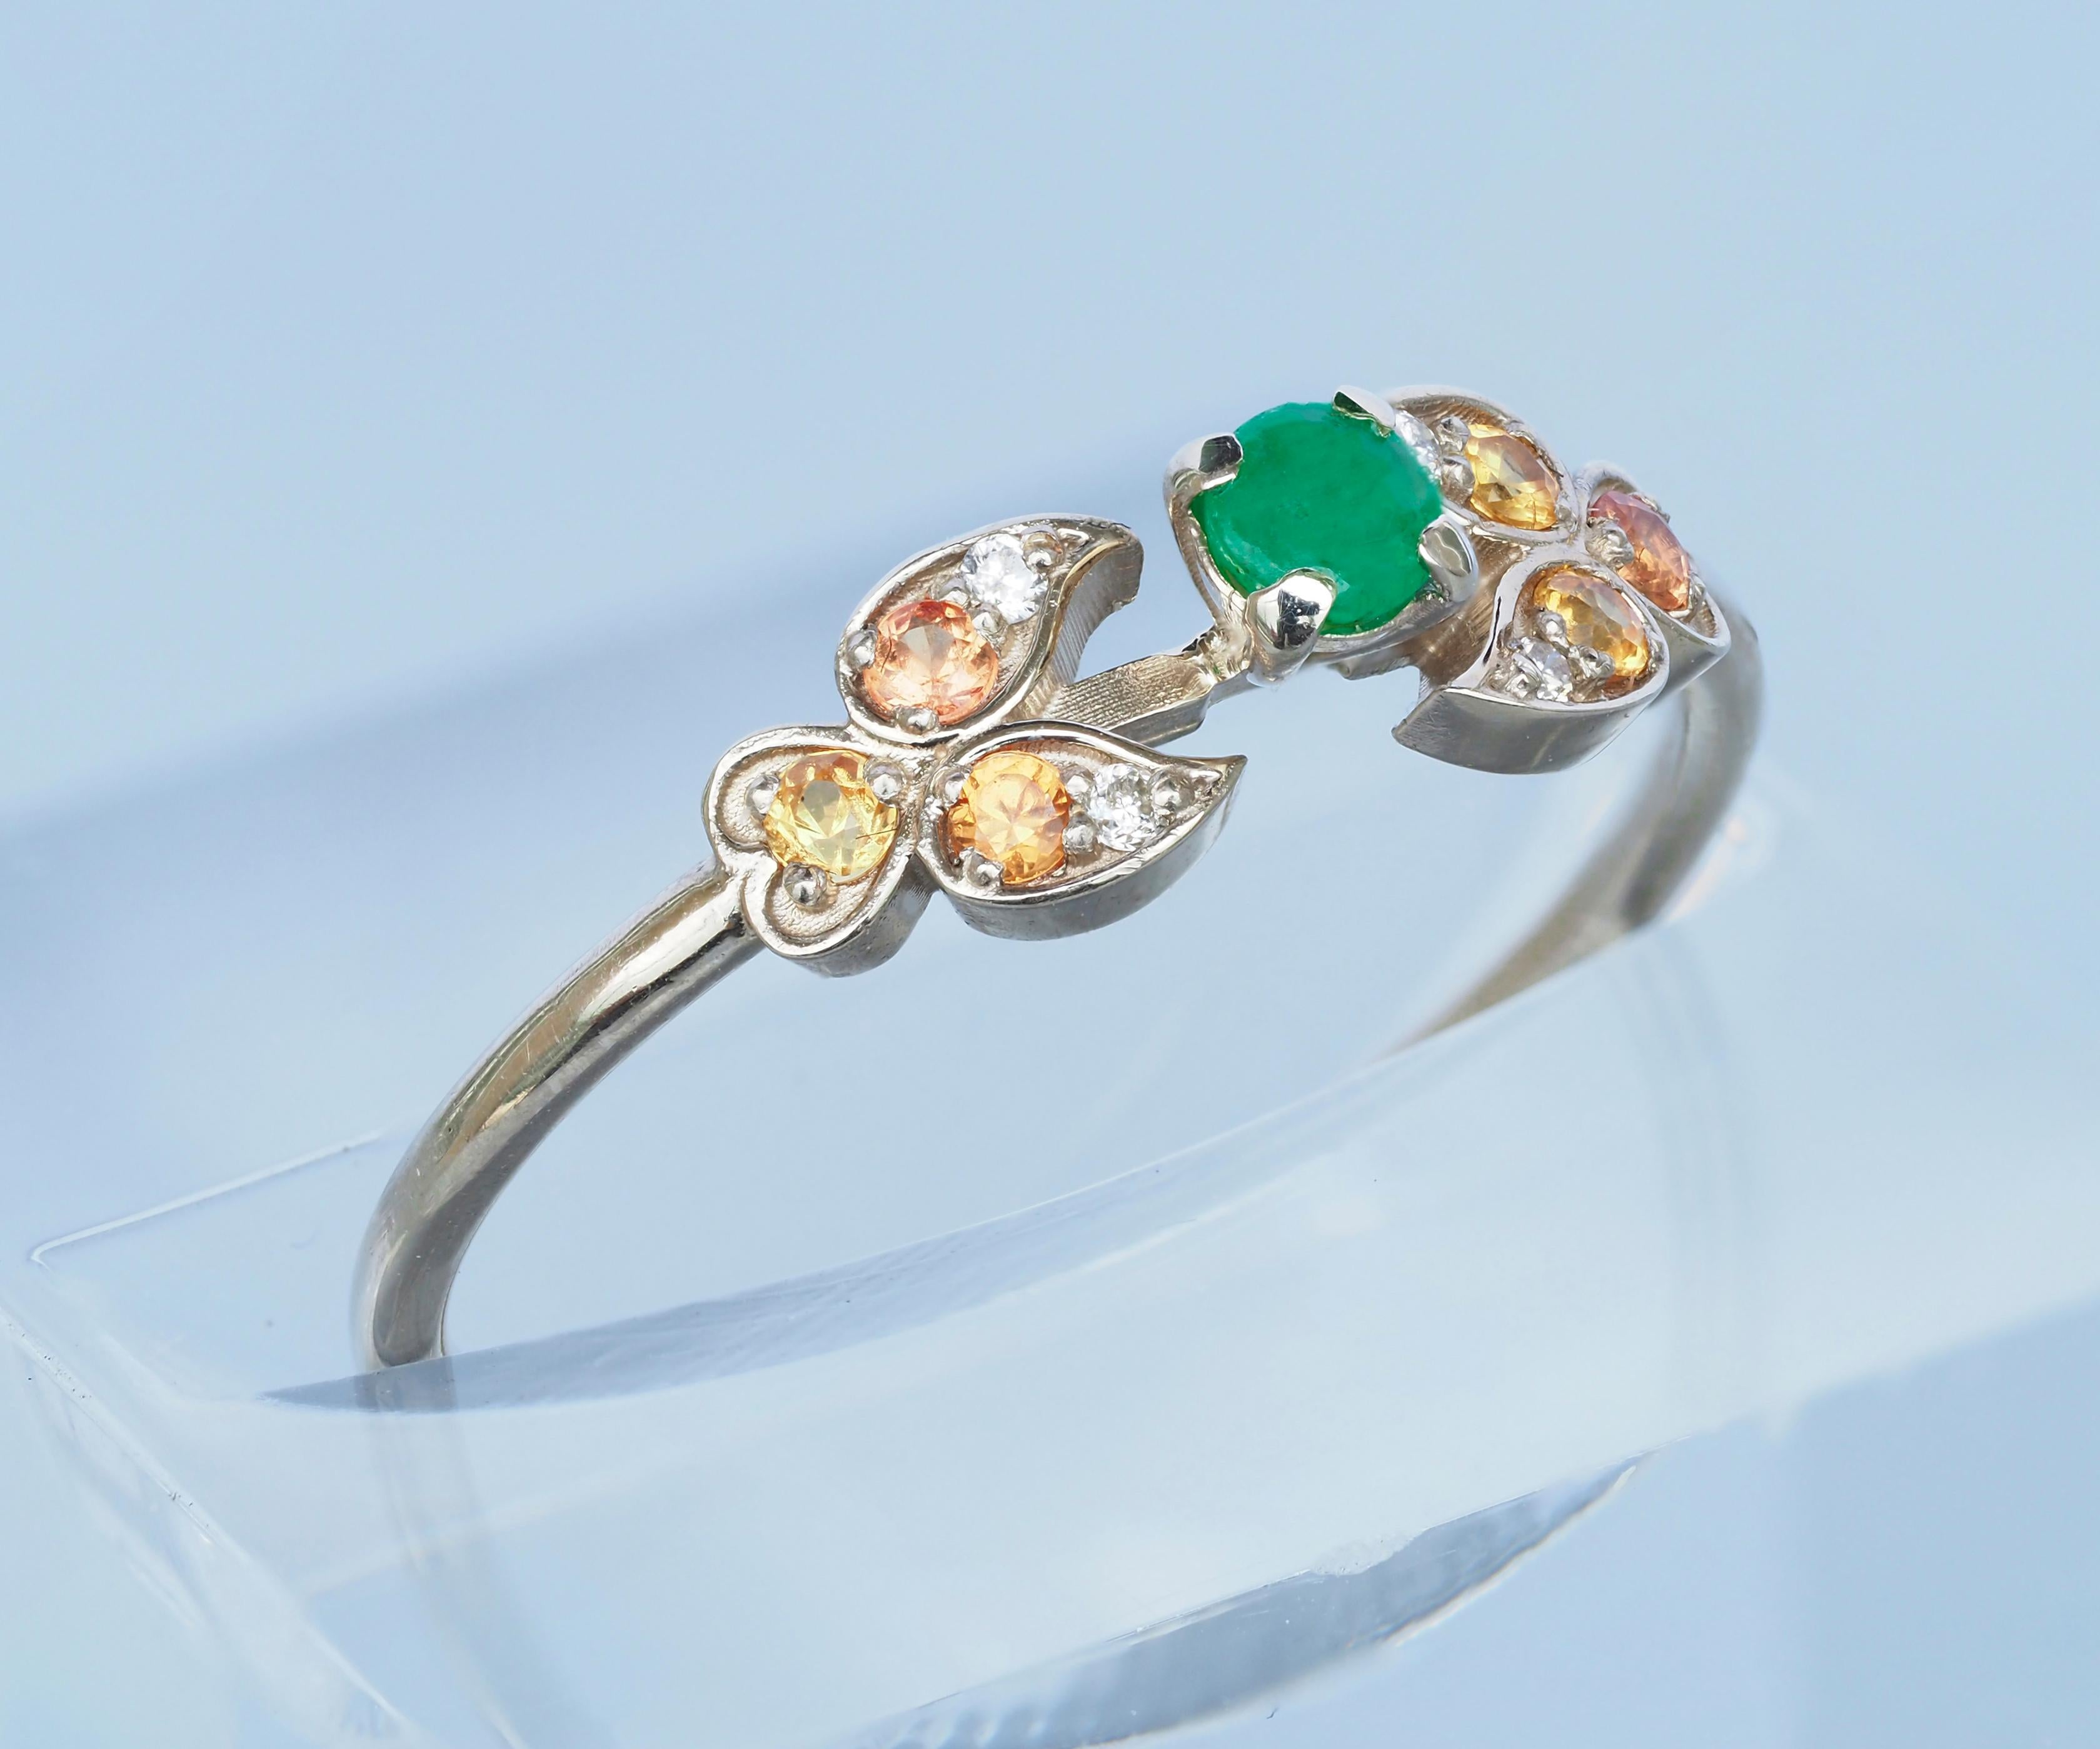 For Sale:  Emerald, Diamonds and Sapphires ring in 14k gold. Tiny ring 6